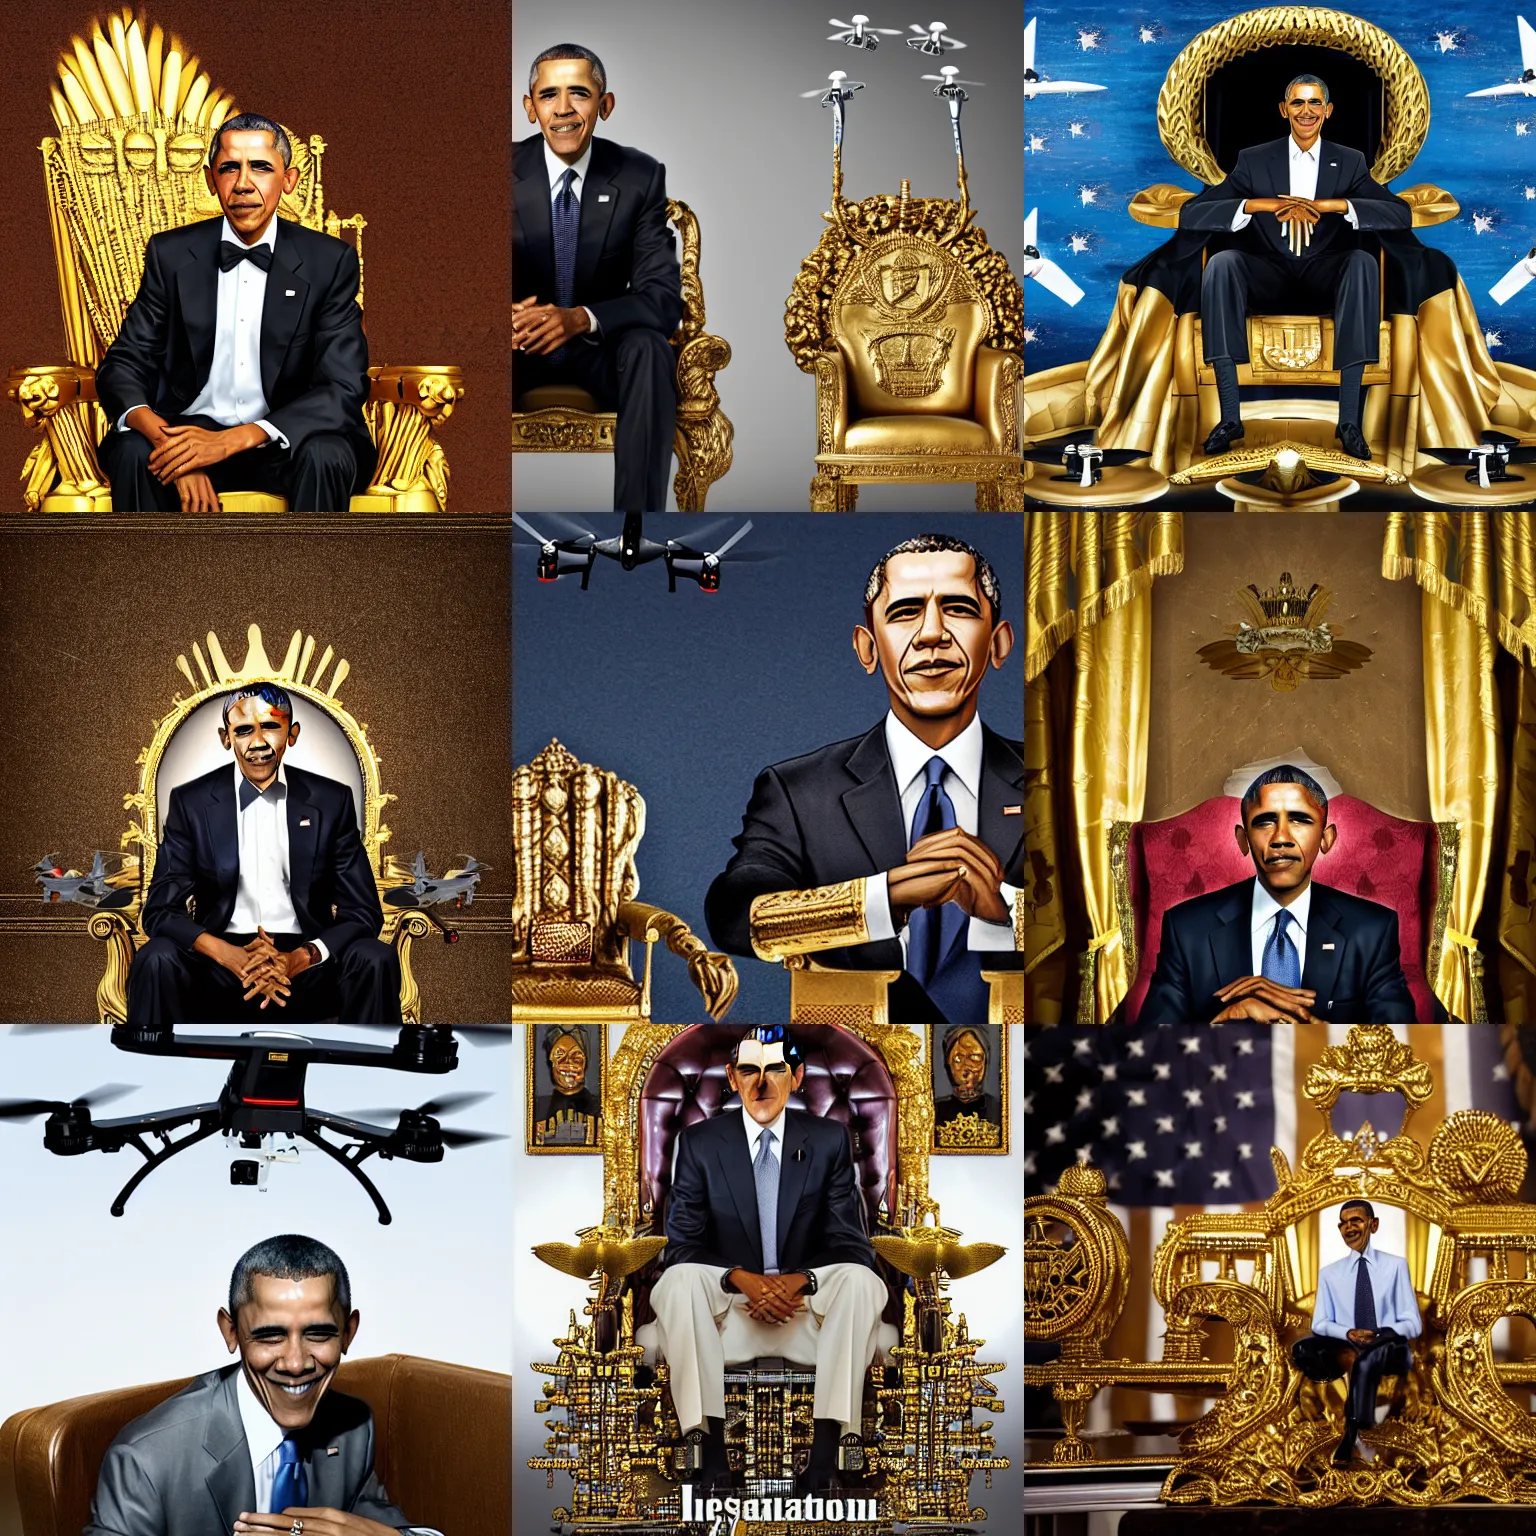 Prompt: photo portrait of Barack Obama The Drone King sitting on a golden throne with MQ-1 Predator drones flying out from under it, (EOS 5DS R, ISO100, f/8, 1/125, 84mm, modelsociety, prime lense)